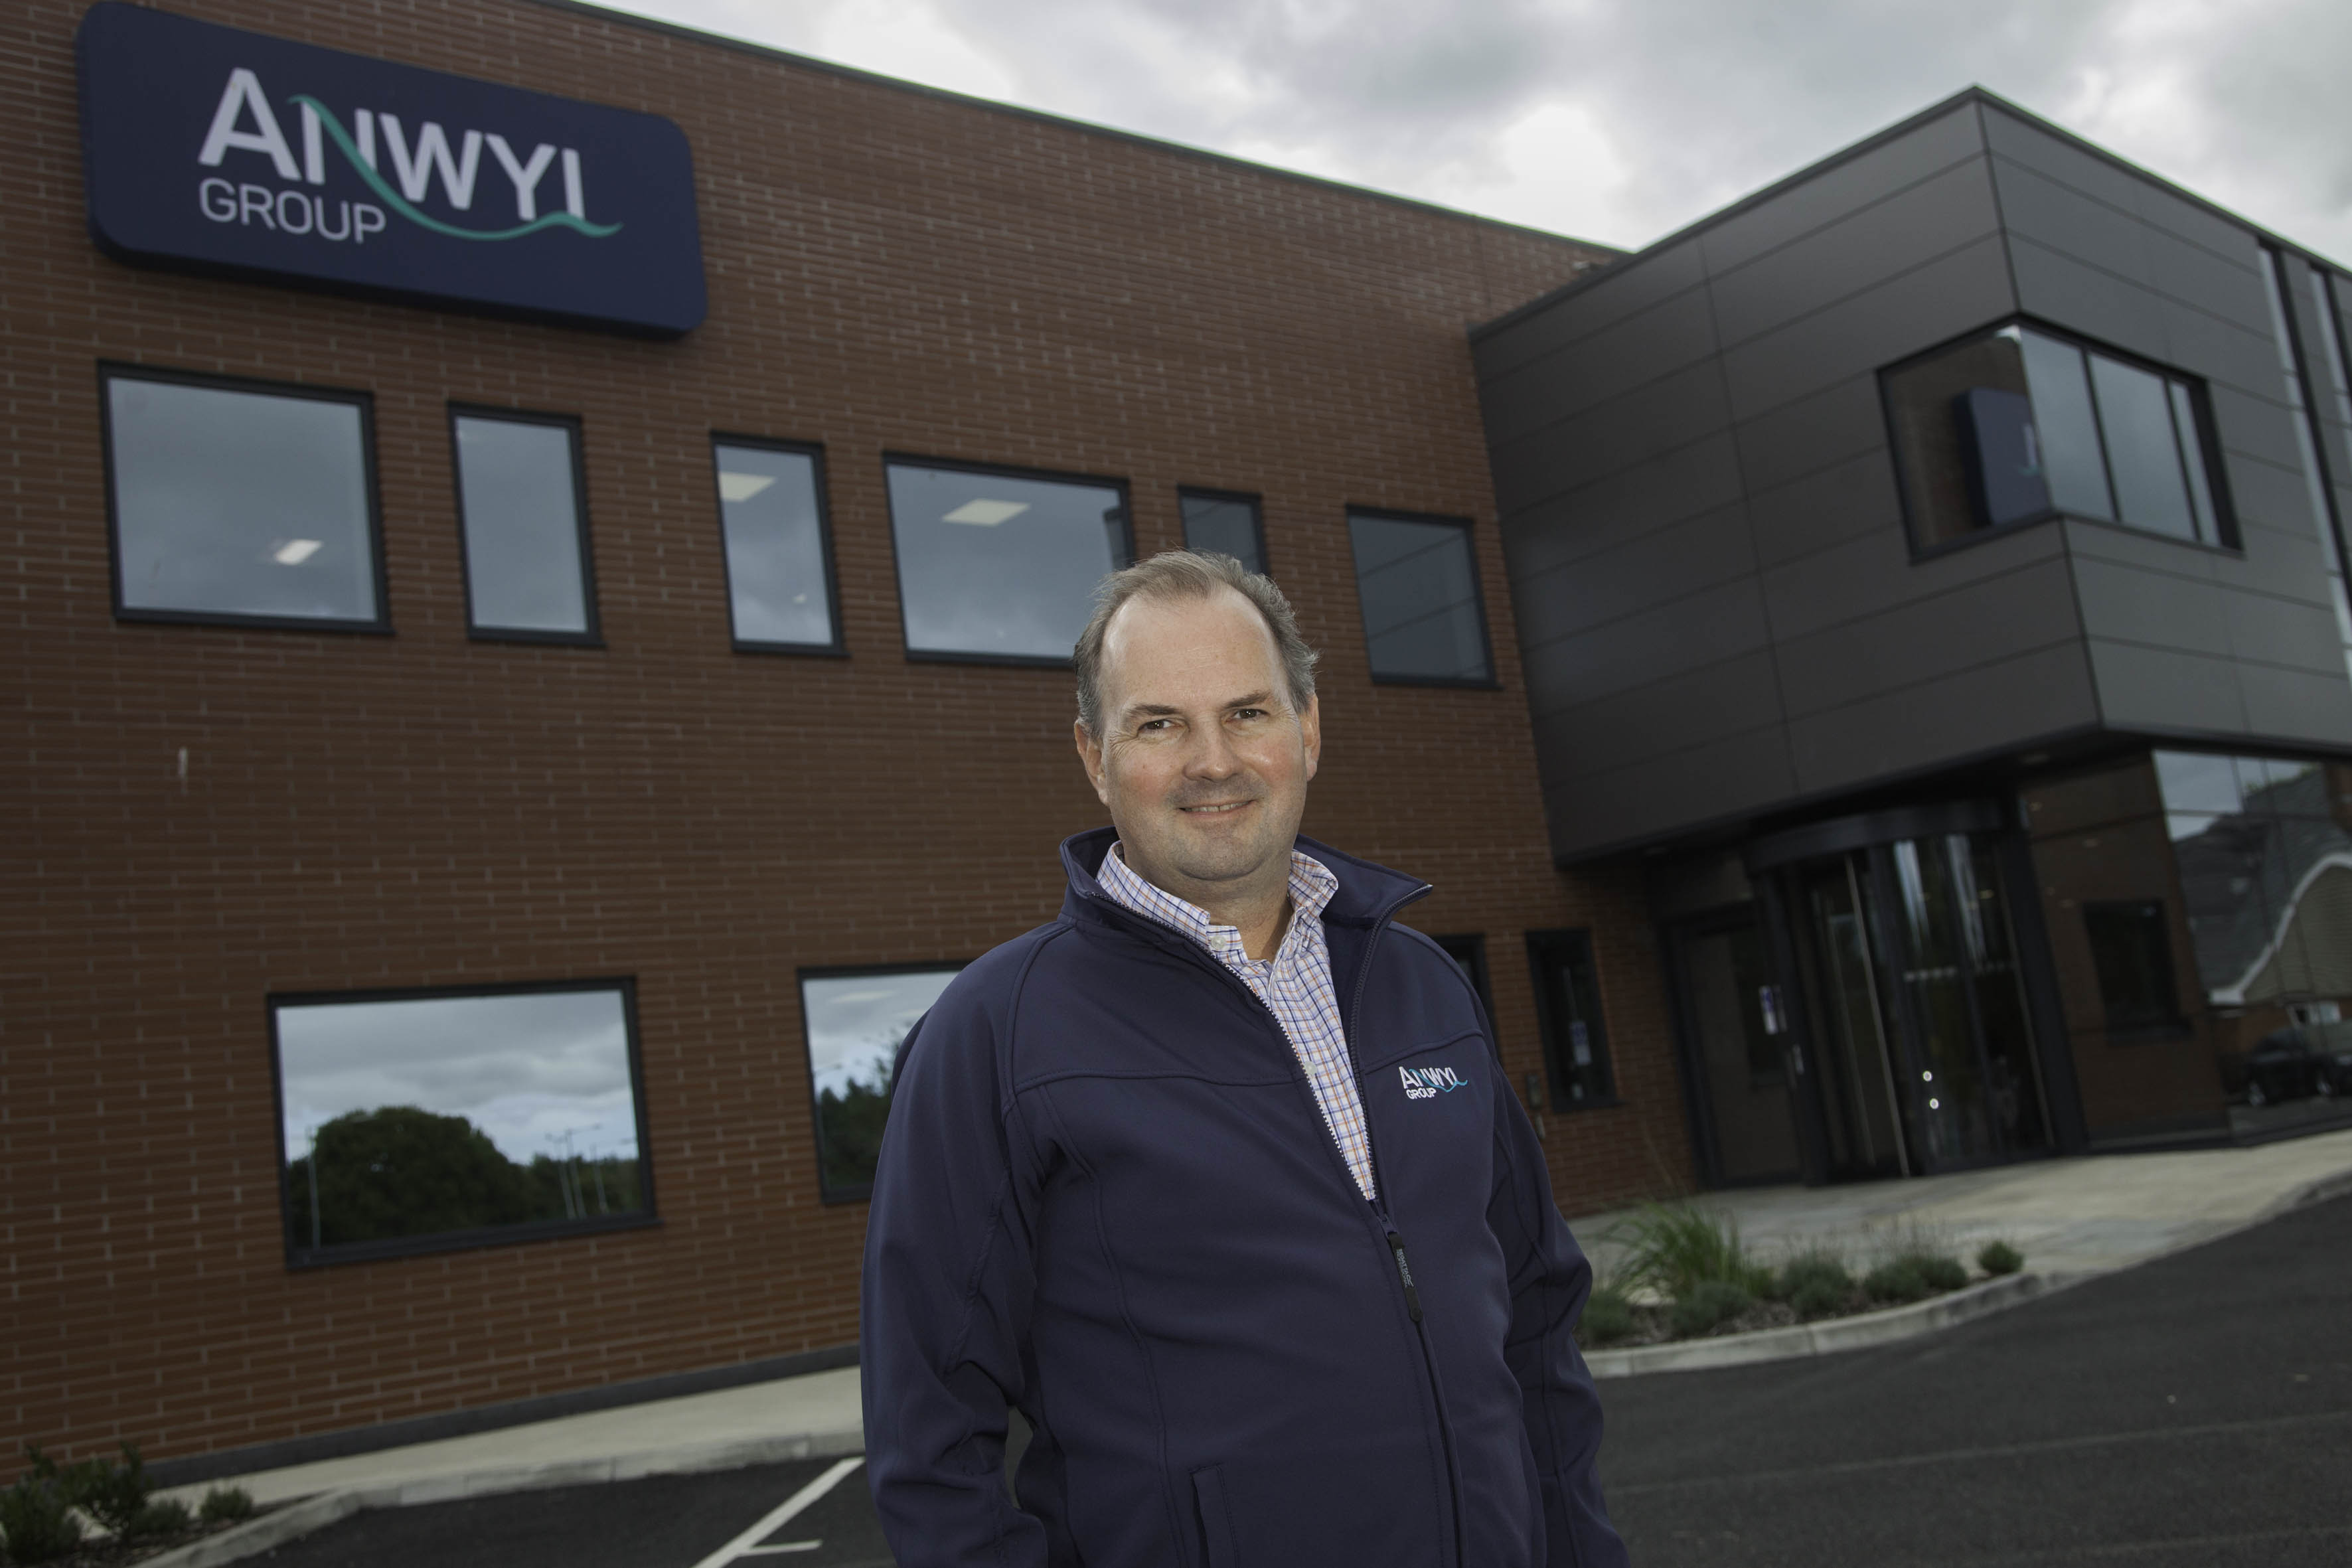 Builder’s major care contracts plough £40 million into North Wales economy